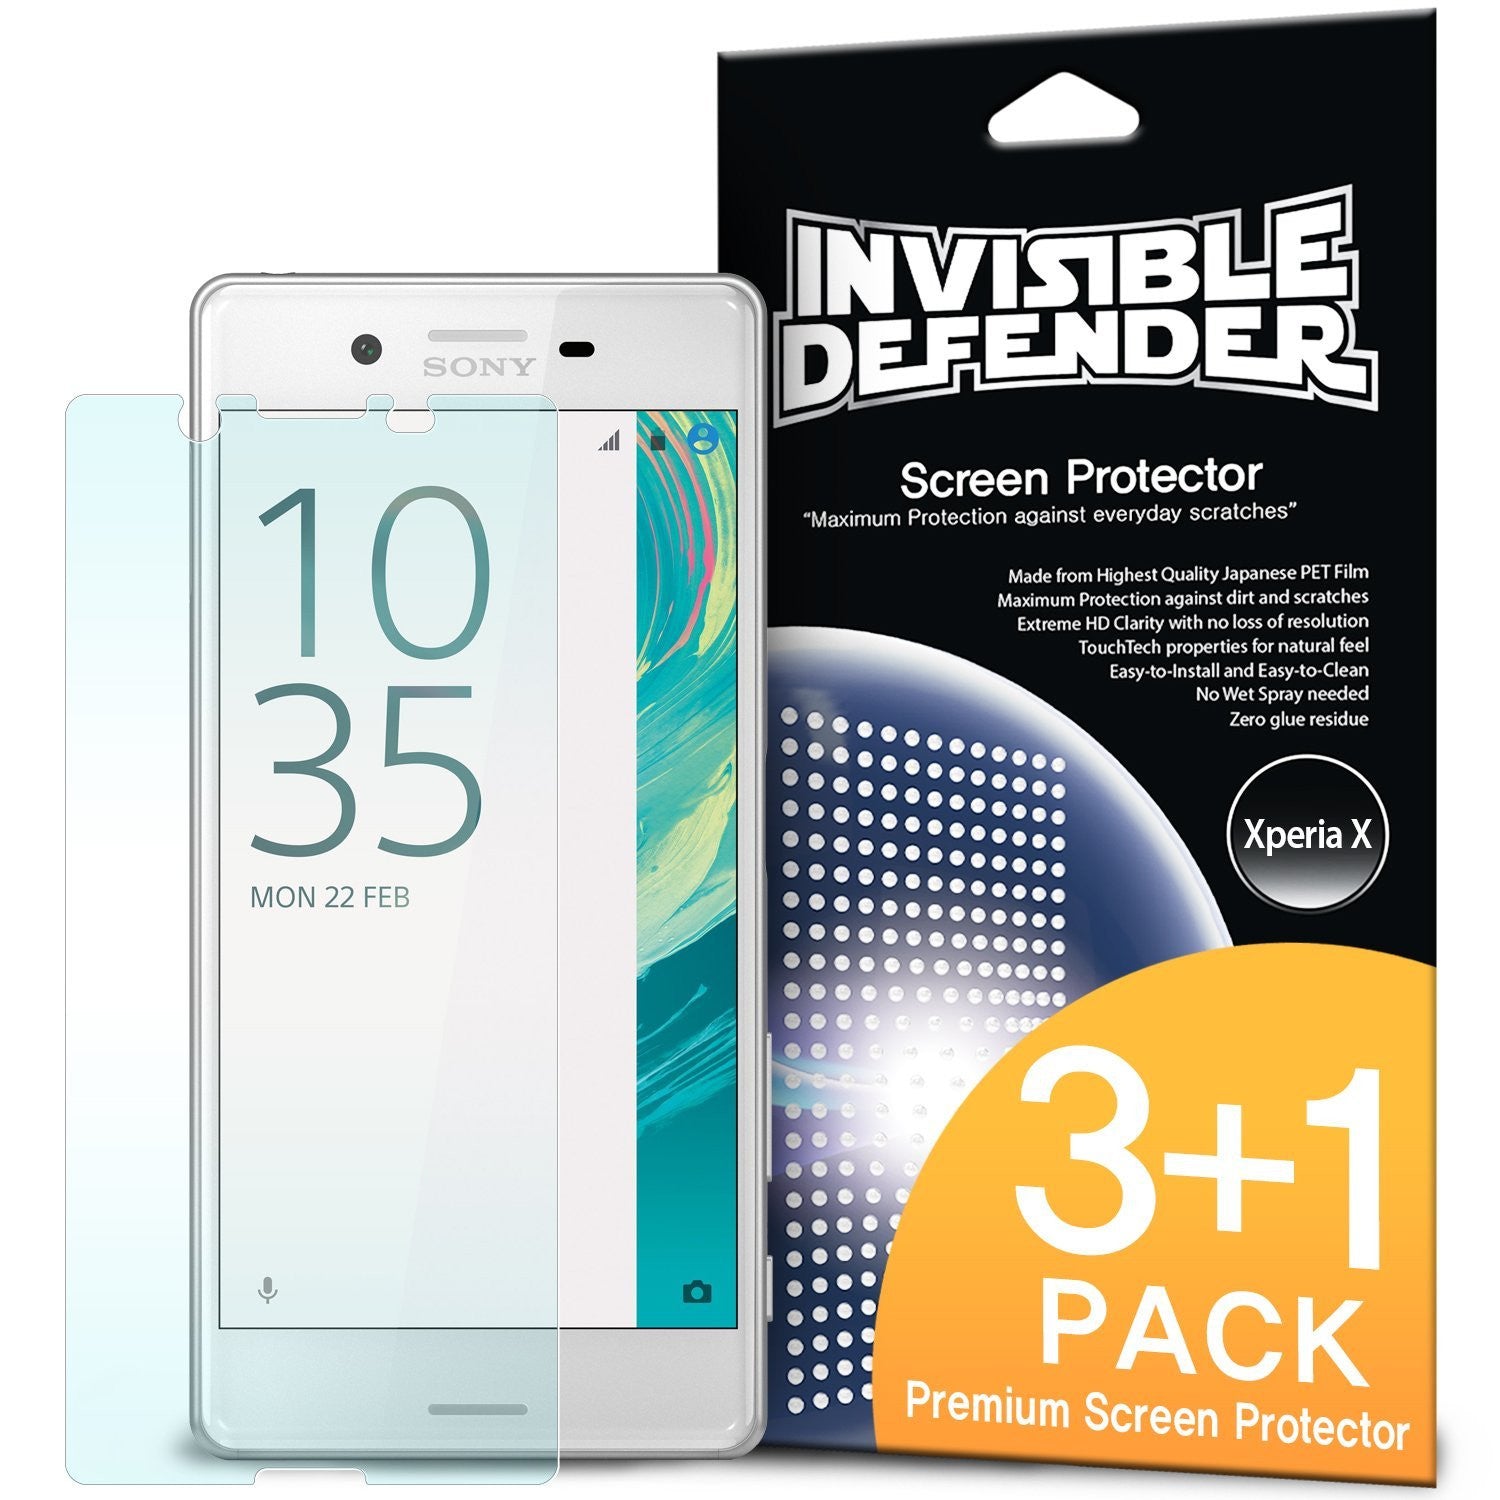 xperia x, ringke invisible defender 3+1 pack screen protector